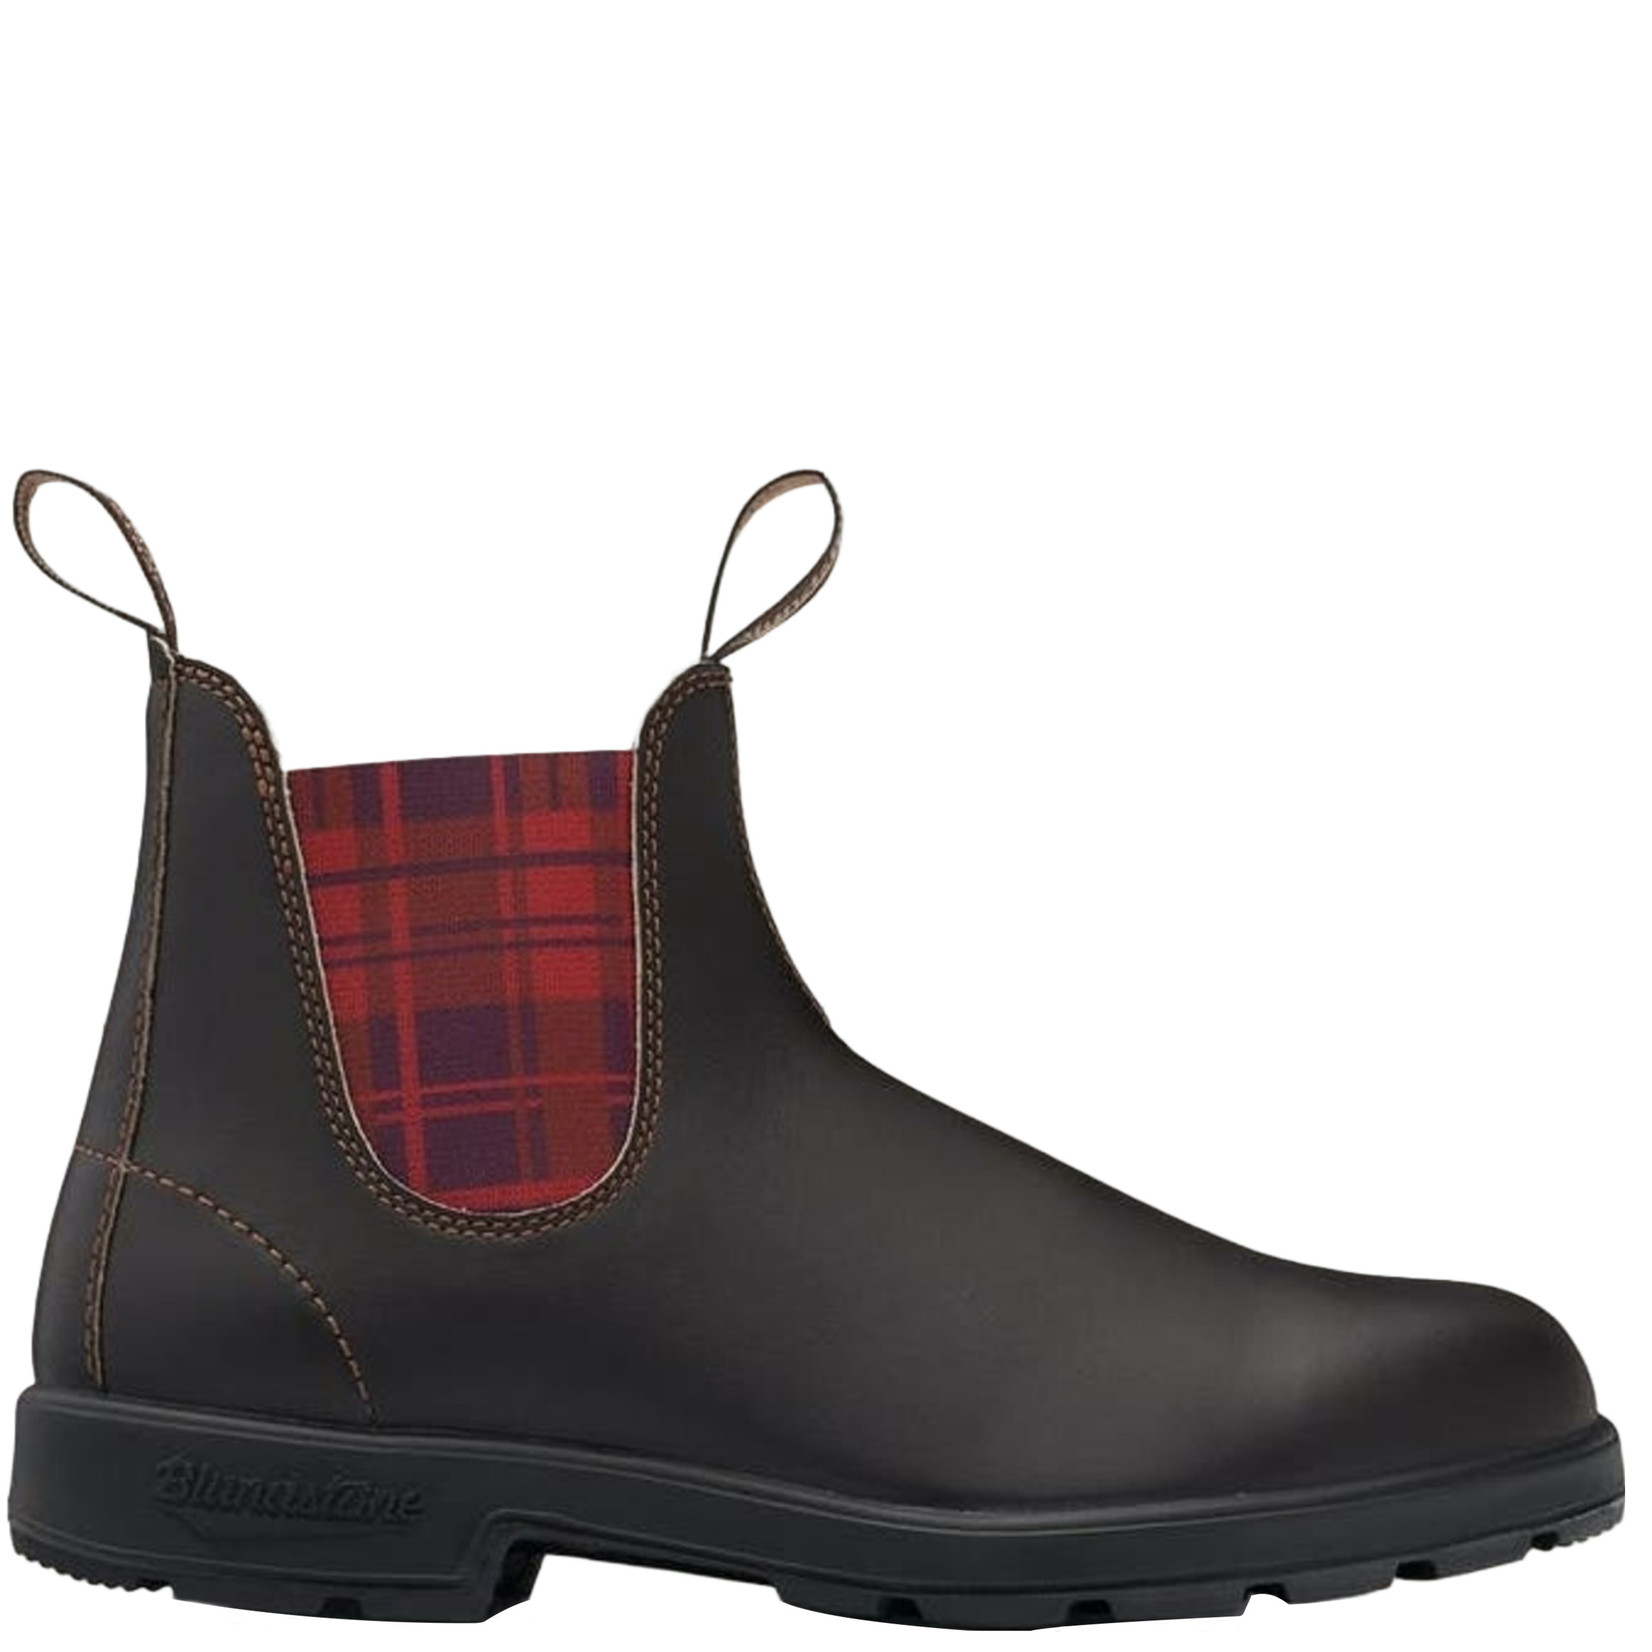 Blundstone 2100 Stout Brown with Burgandy